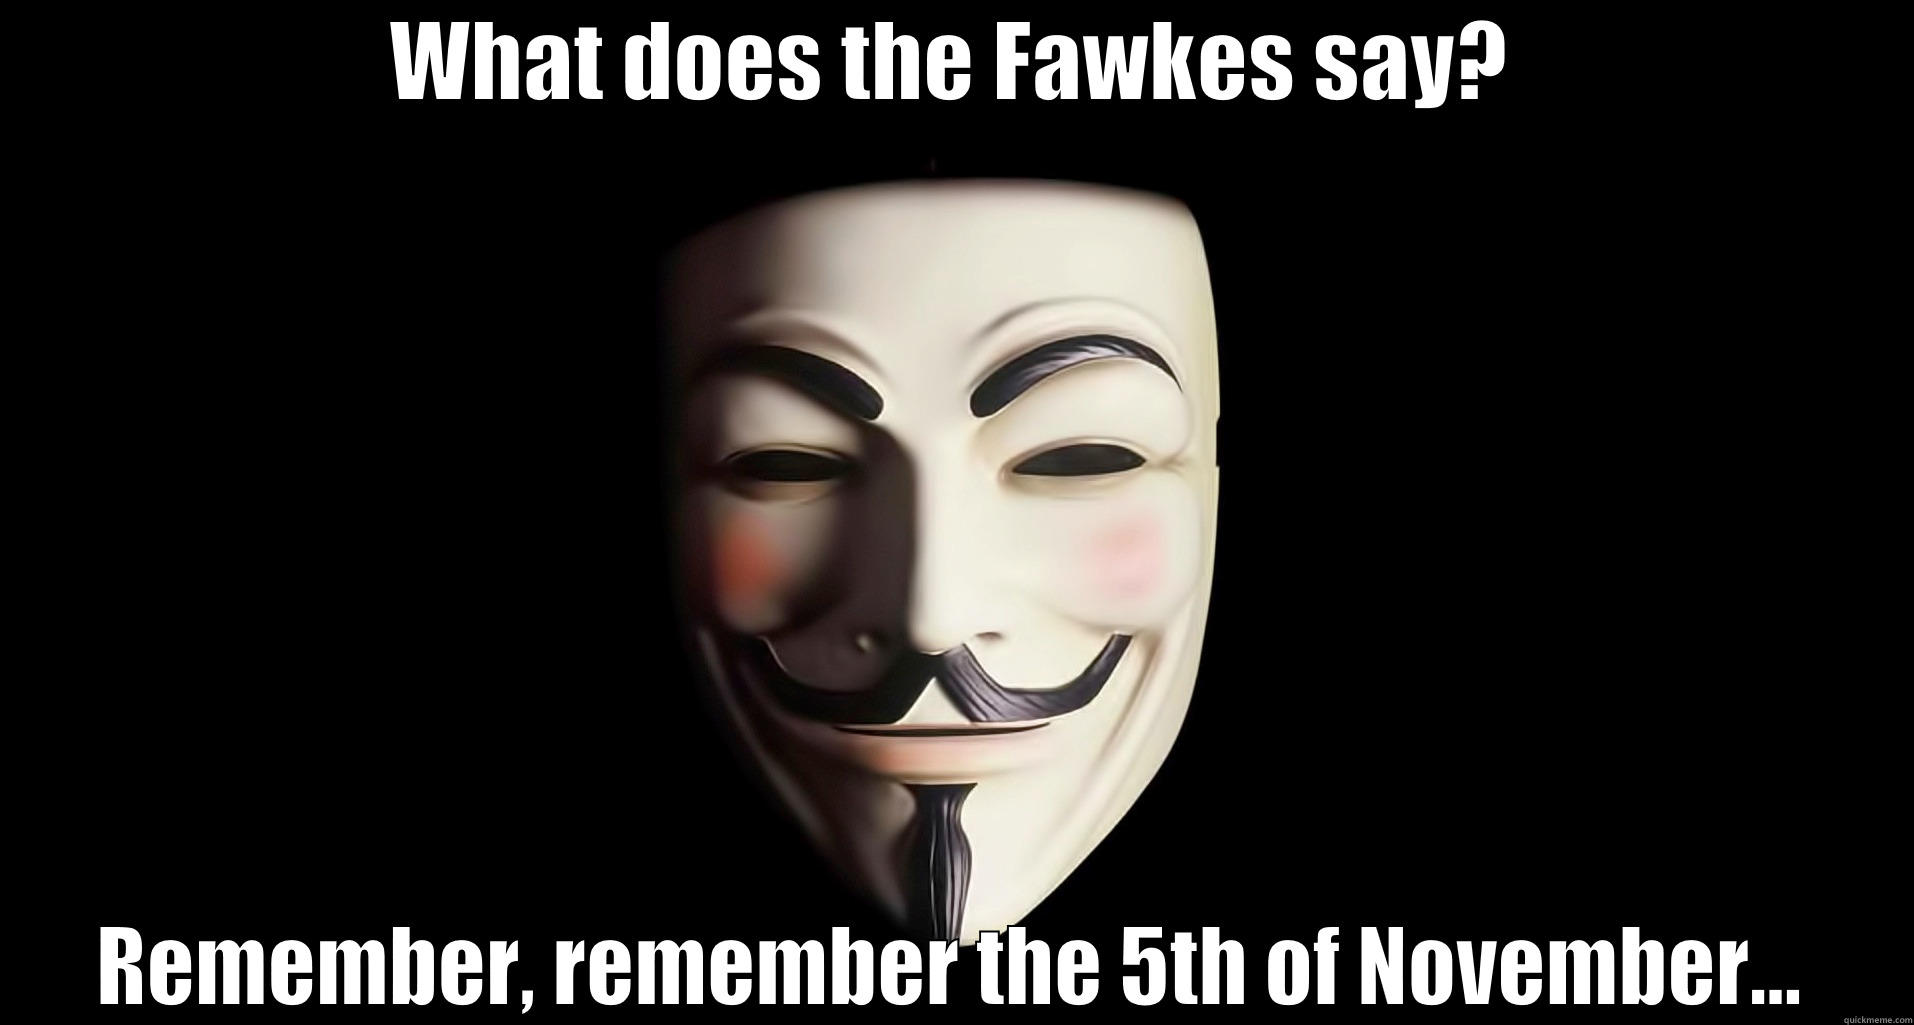 What does the Fawkes Say? - WHAT DOES THE FAWKES SAY? REMEMBER, REMEMBER THE 5TH OF NOVEMBER... Misc